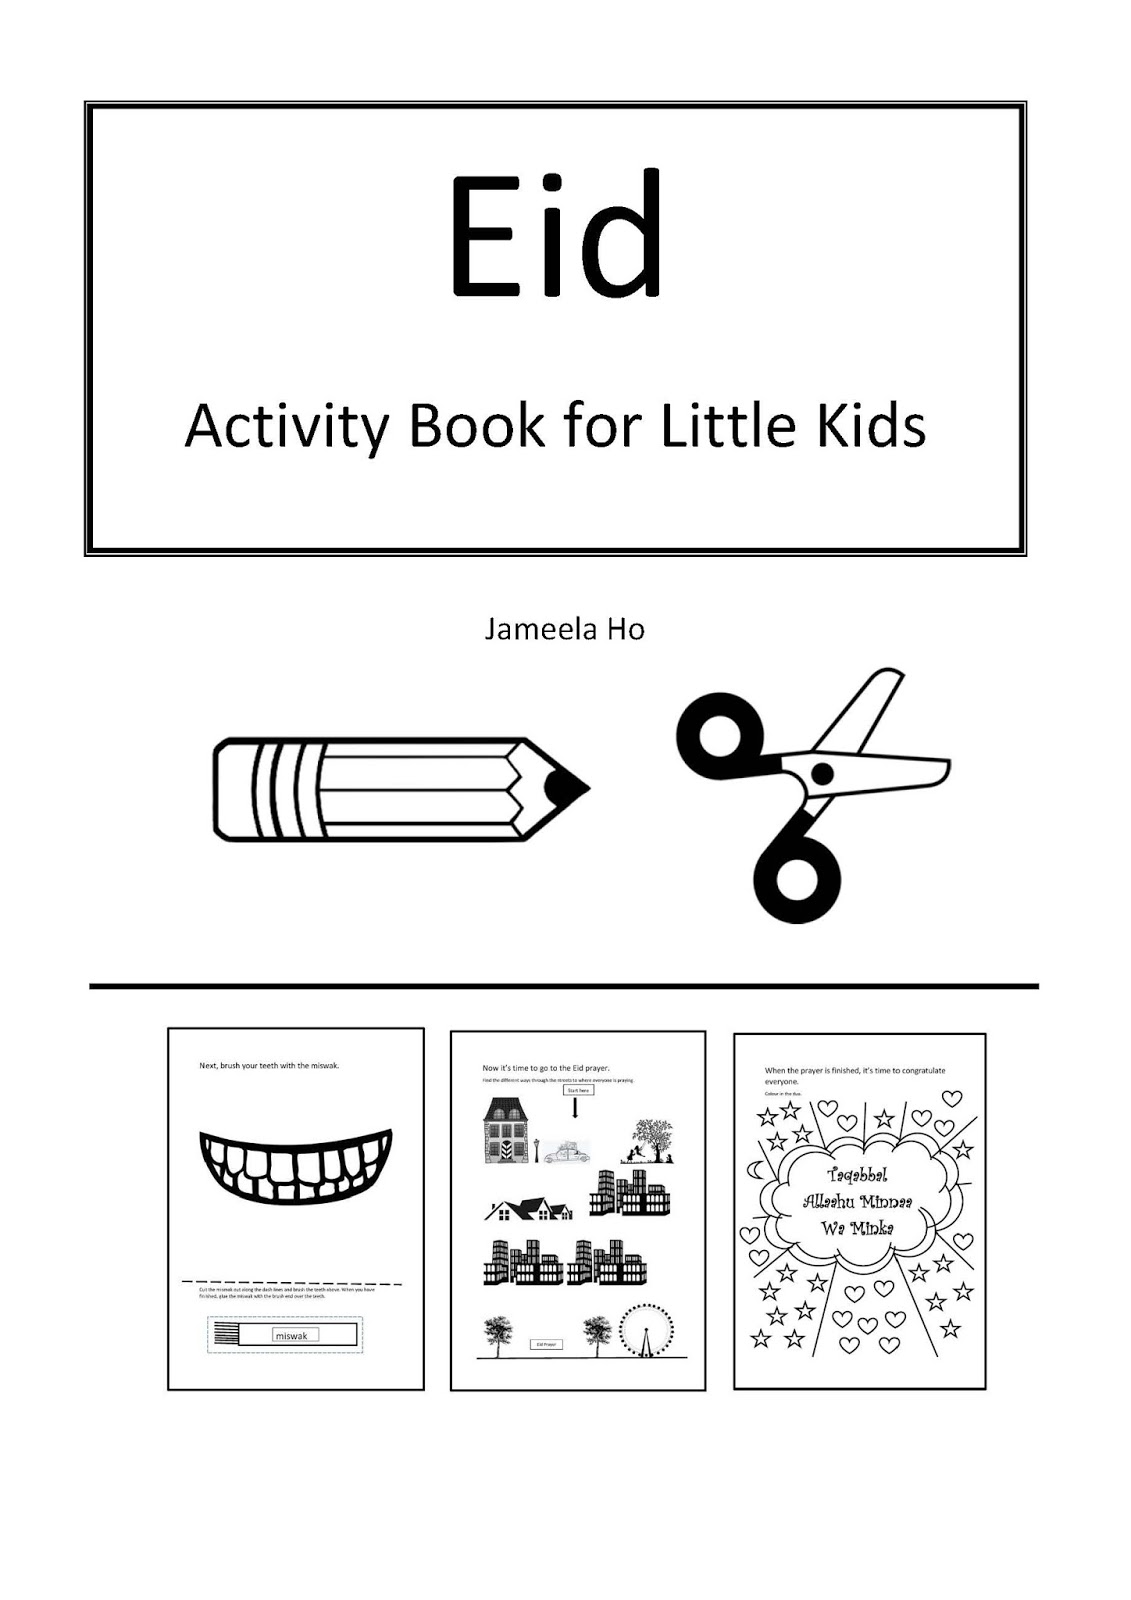 ILMA Education: Free Download: Eid Activity Book for Little Kids